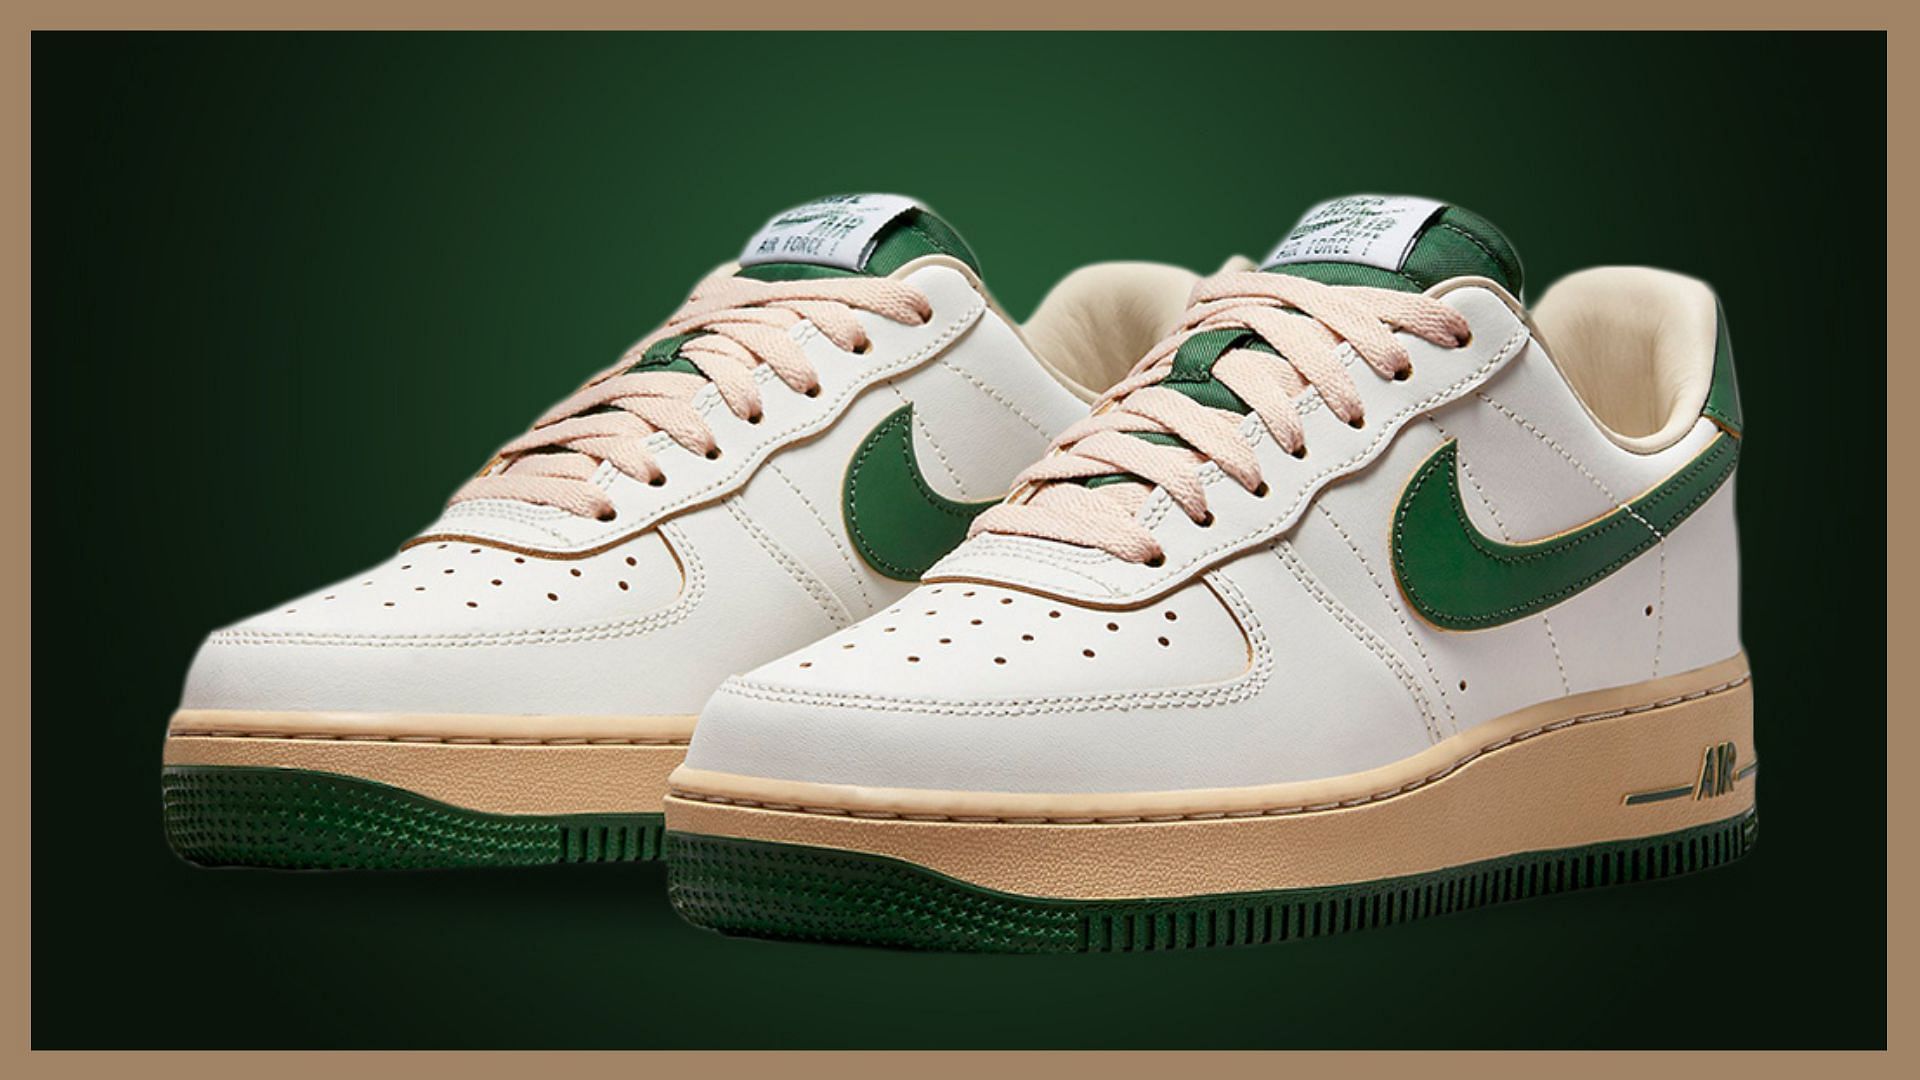 Reunión Disminución congelador Where to buy Nike Air Force 1 Low Gorge Green shoes? Price and more details  explored